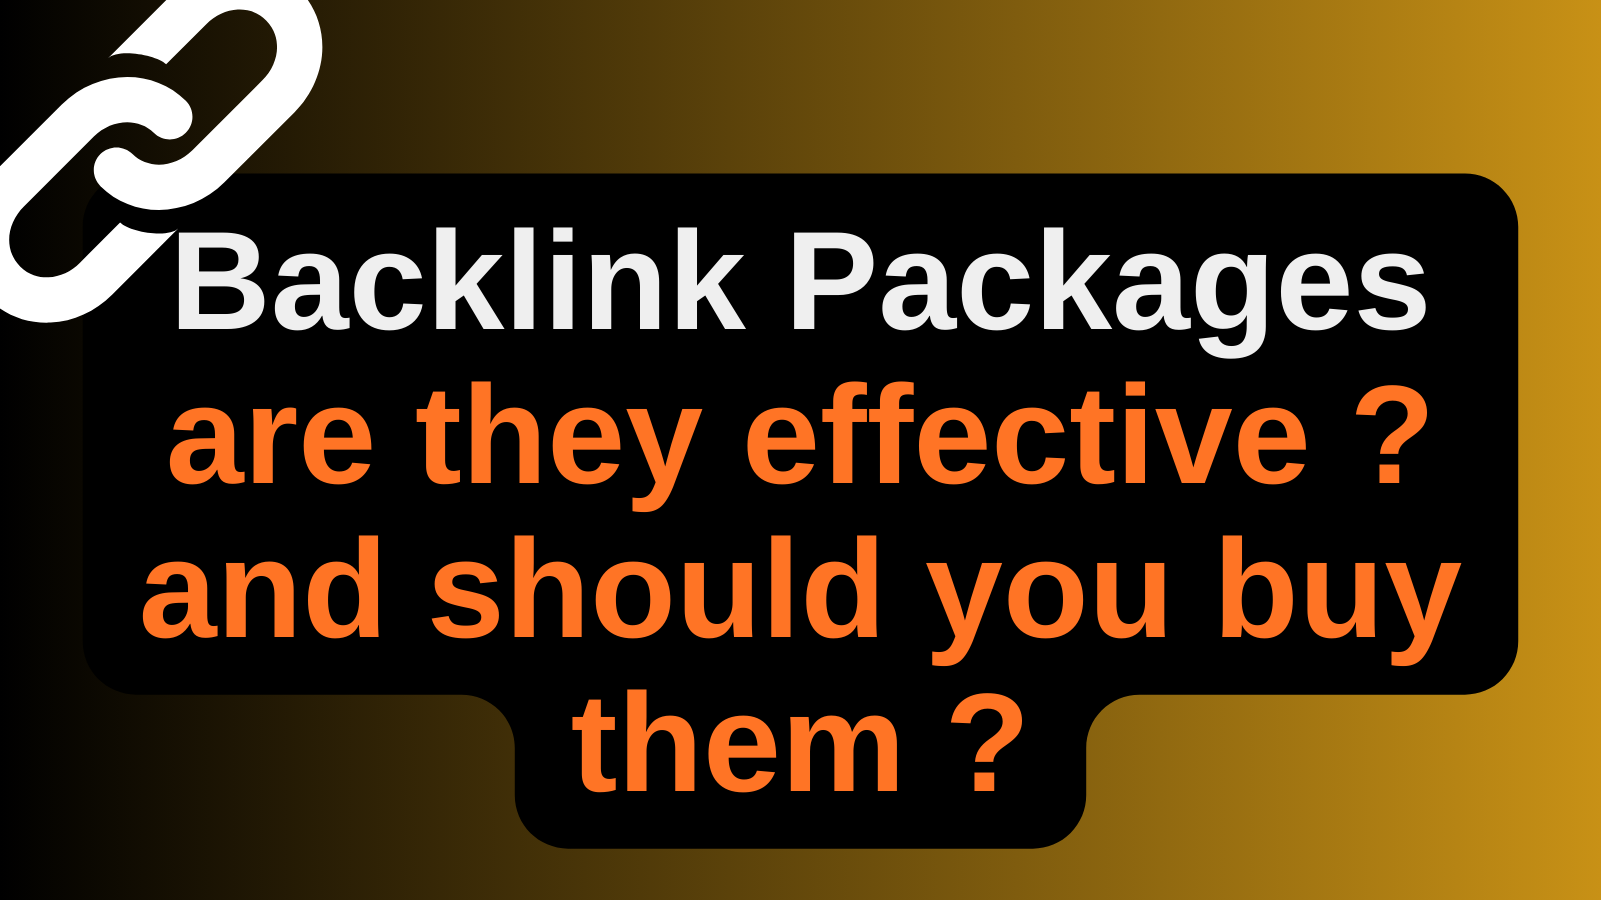 Backlink Packages are they effective and should you buy them ?